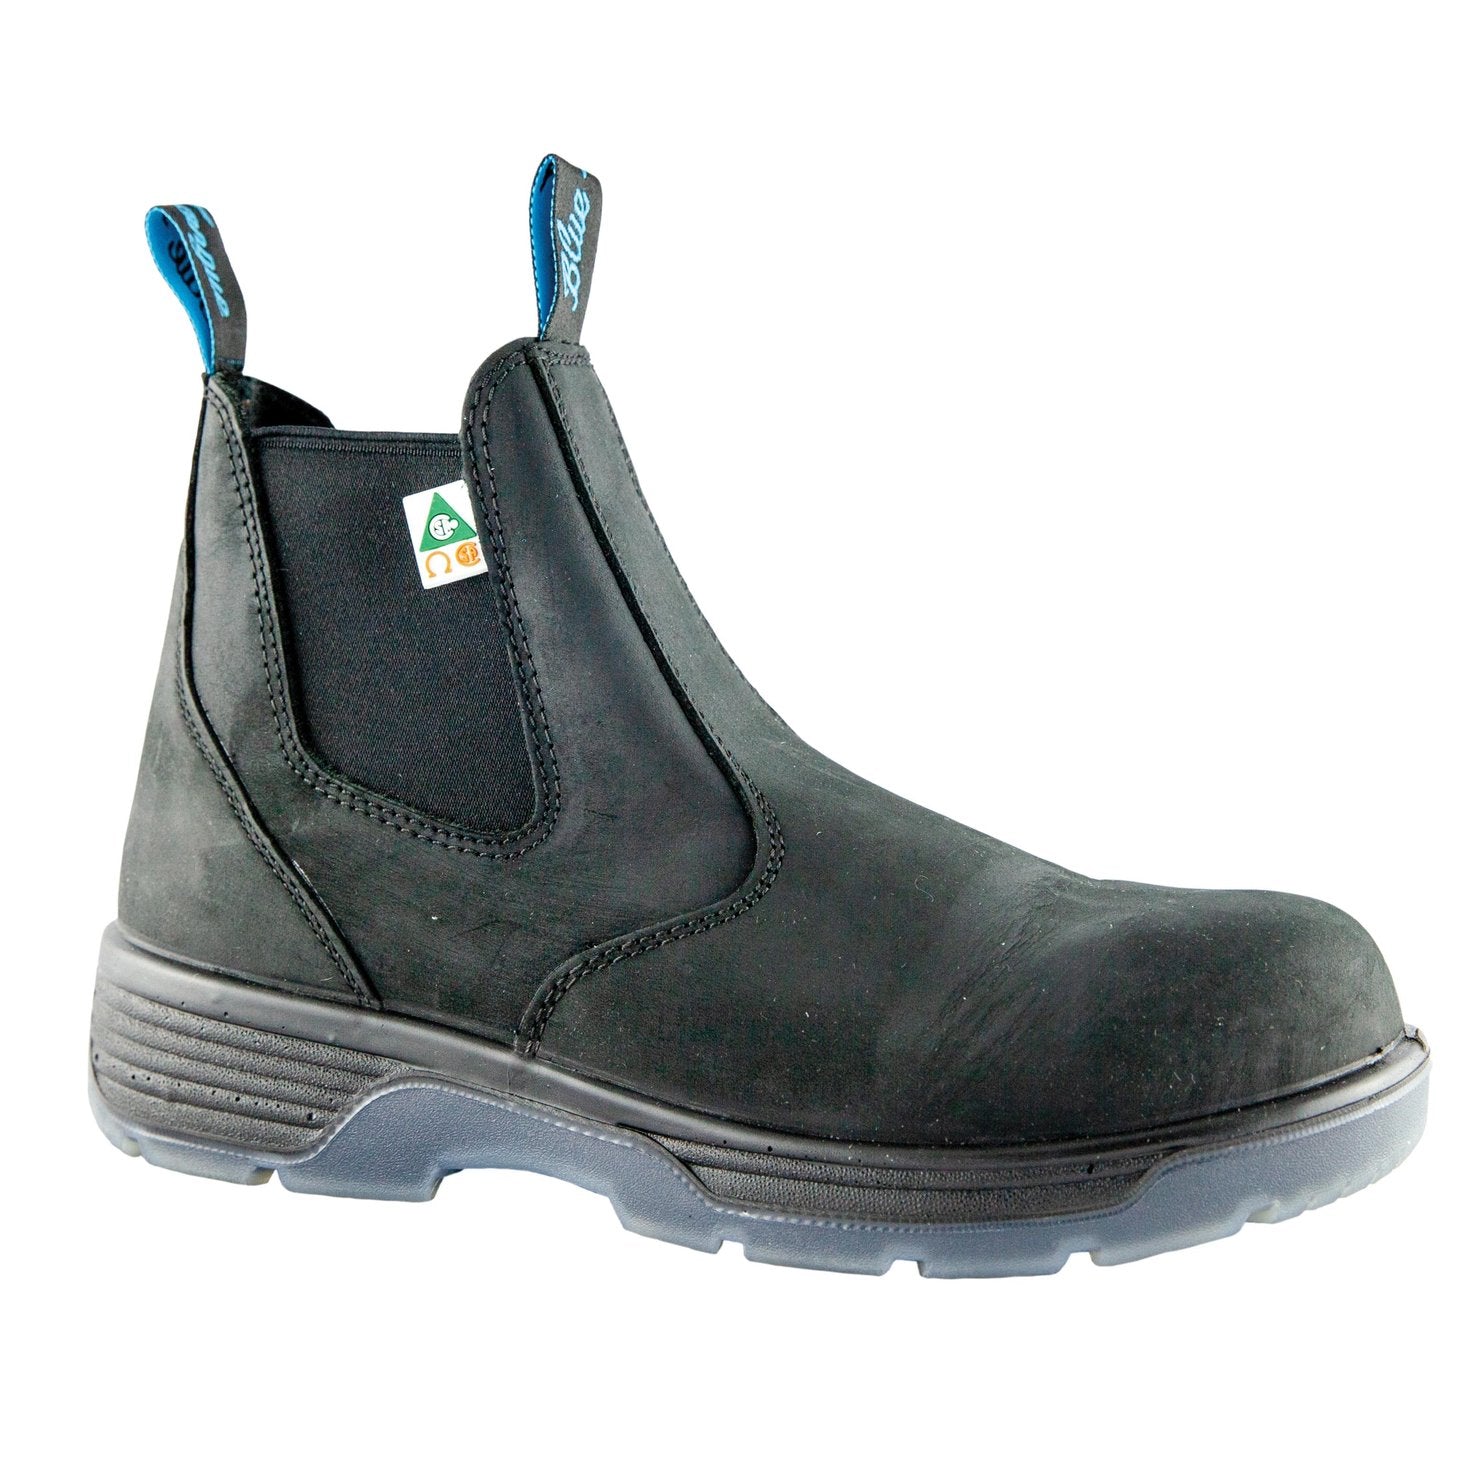 Redback Blue Tongue Station Boots (Composite Toe)  (BTCST) | Fire Store | Fuego Fire Center | Firefighter Gear | 6’’ Slip on, Composite Toe  design with versatile functionality to fit all your jobs needs. This lightweight boot features a 100% Oiled Nubuck leather upper construction for long term wear and is internally leather lined for softness and comfort